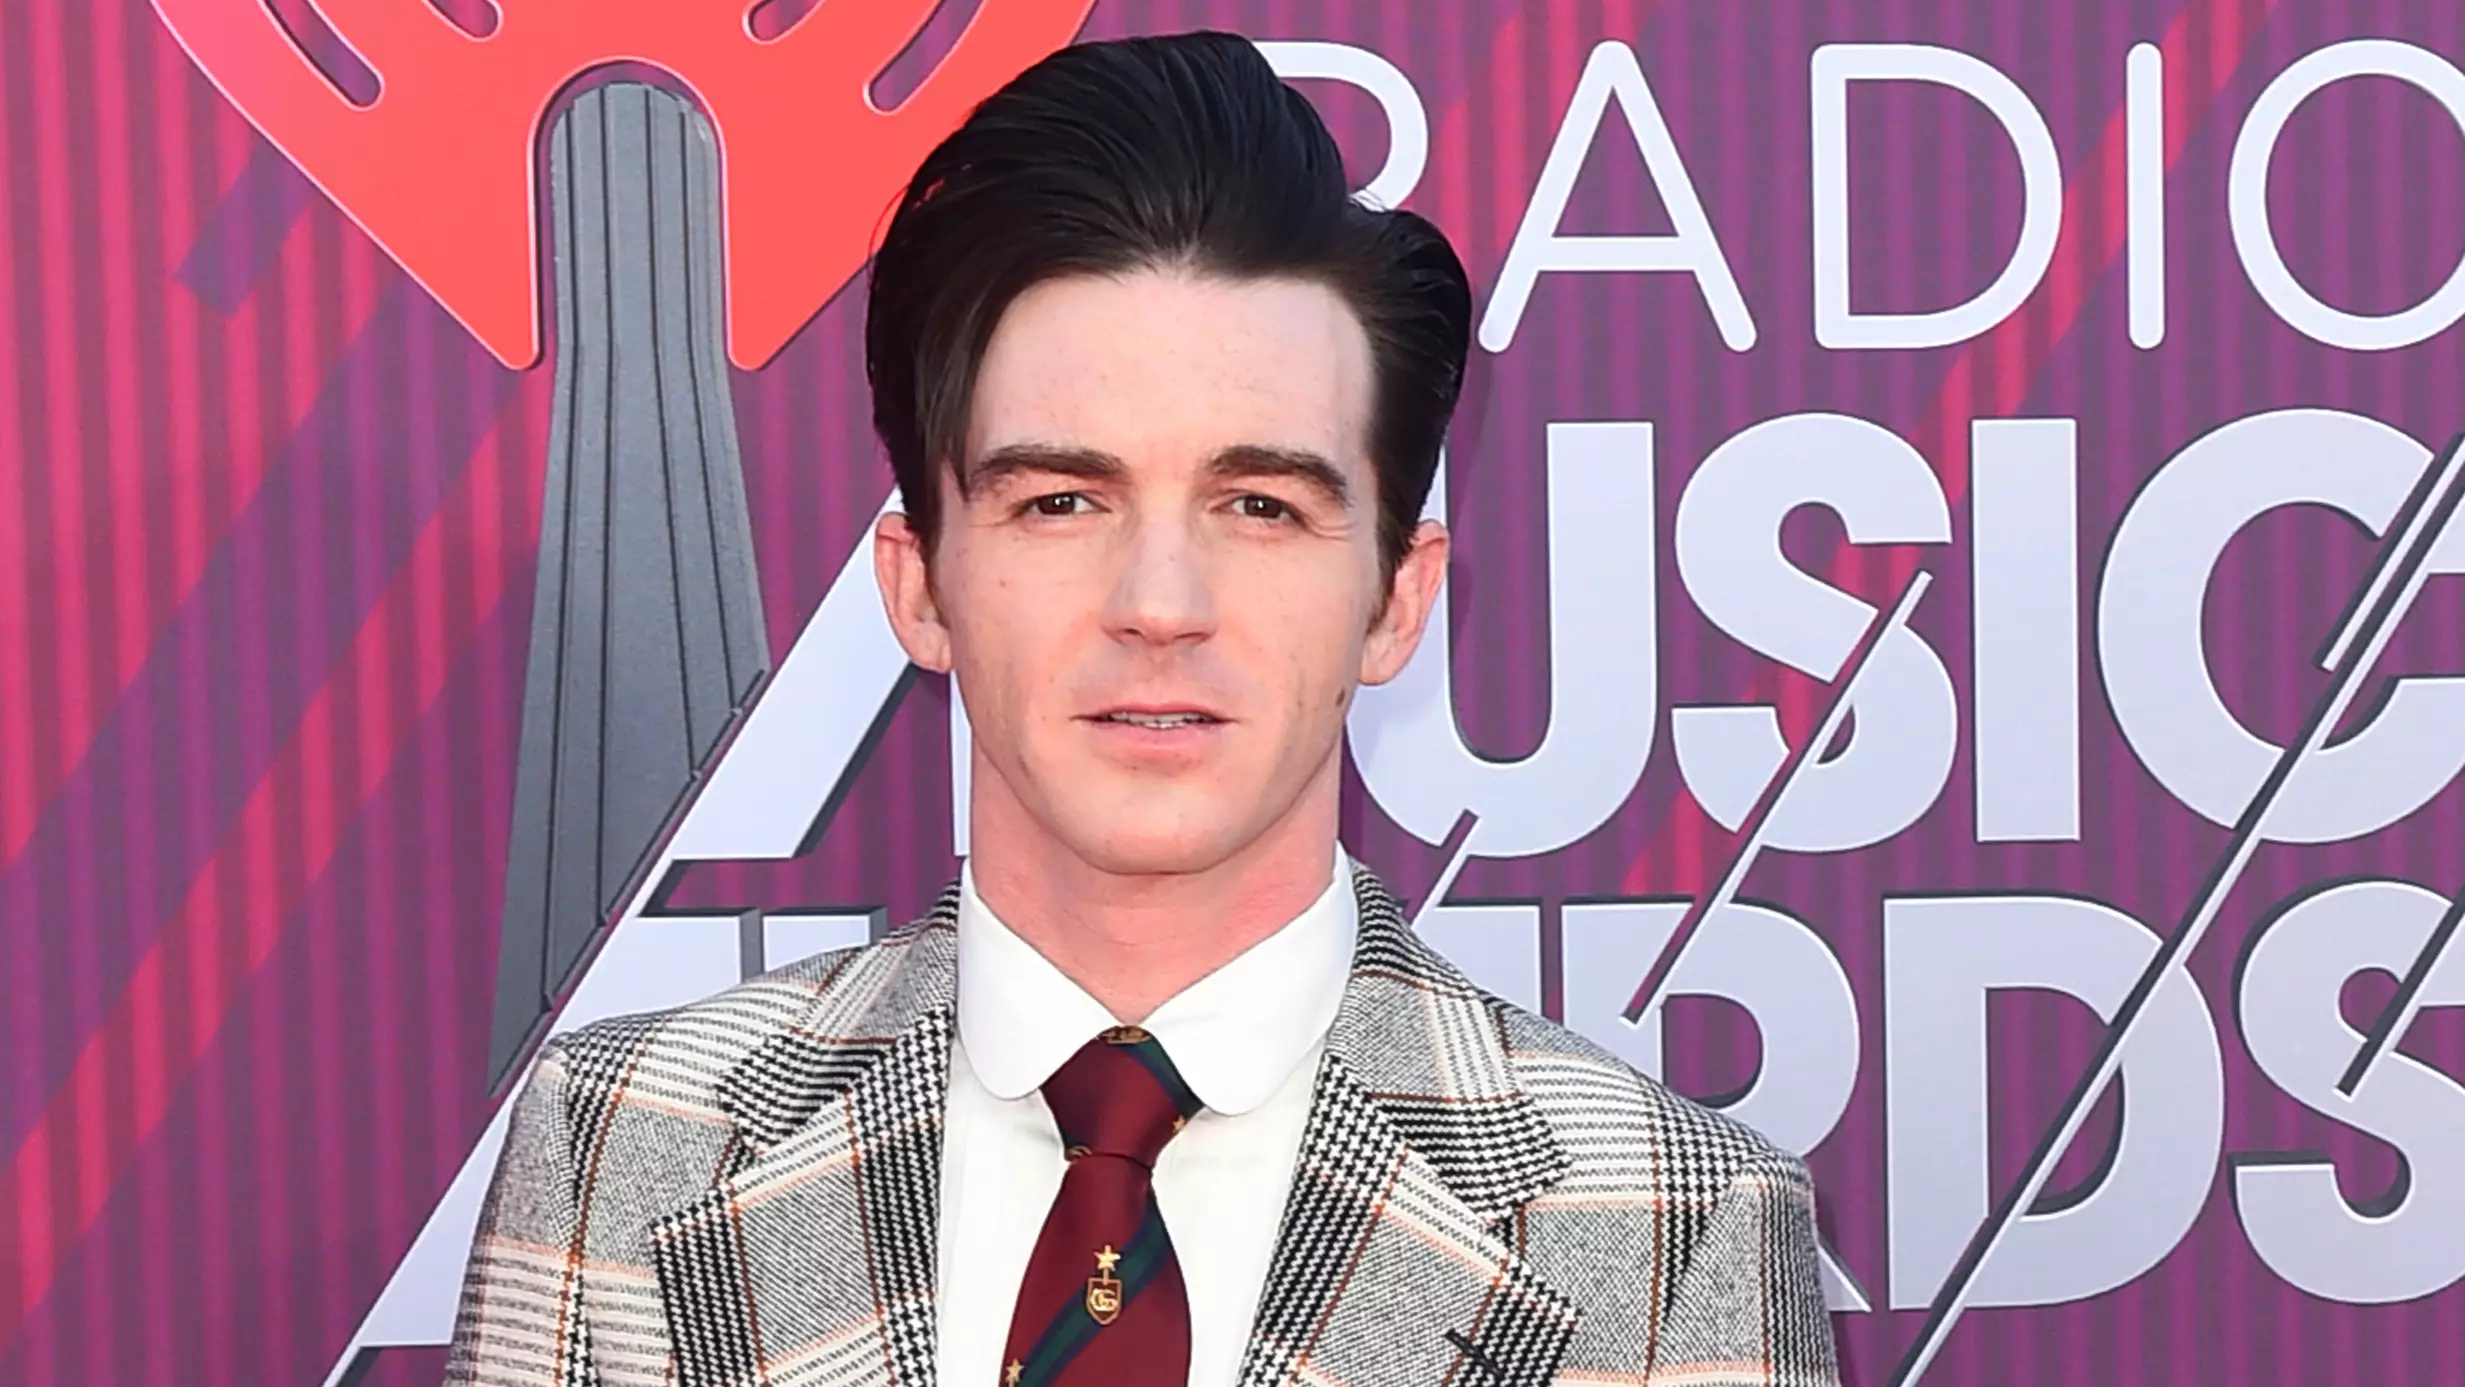 Drake Bell Given Two Years Probation On Child Endangerment Charge